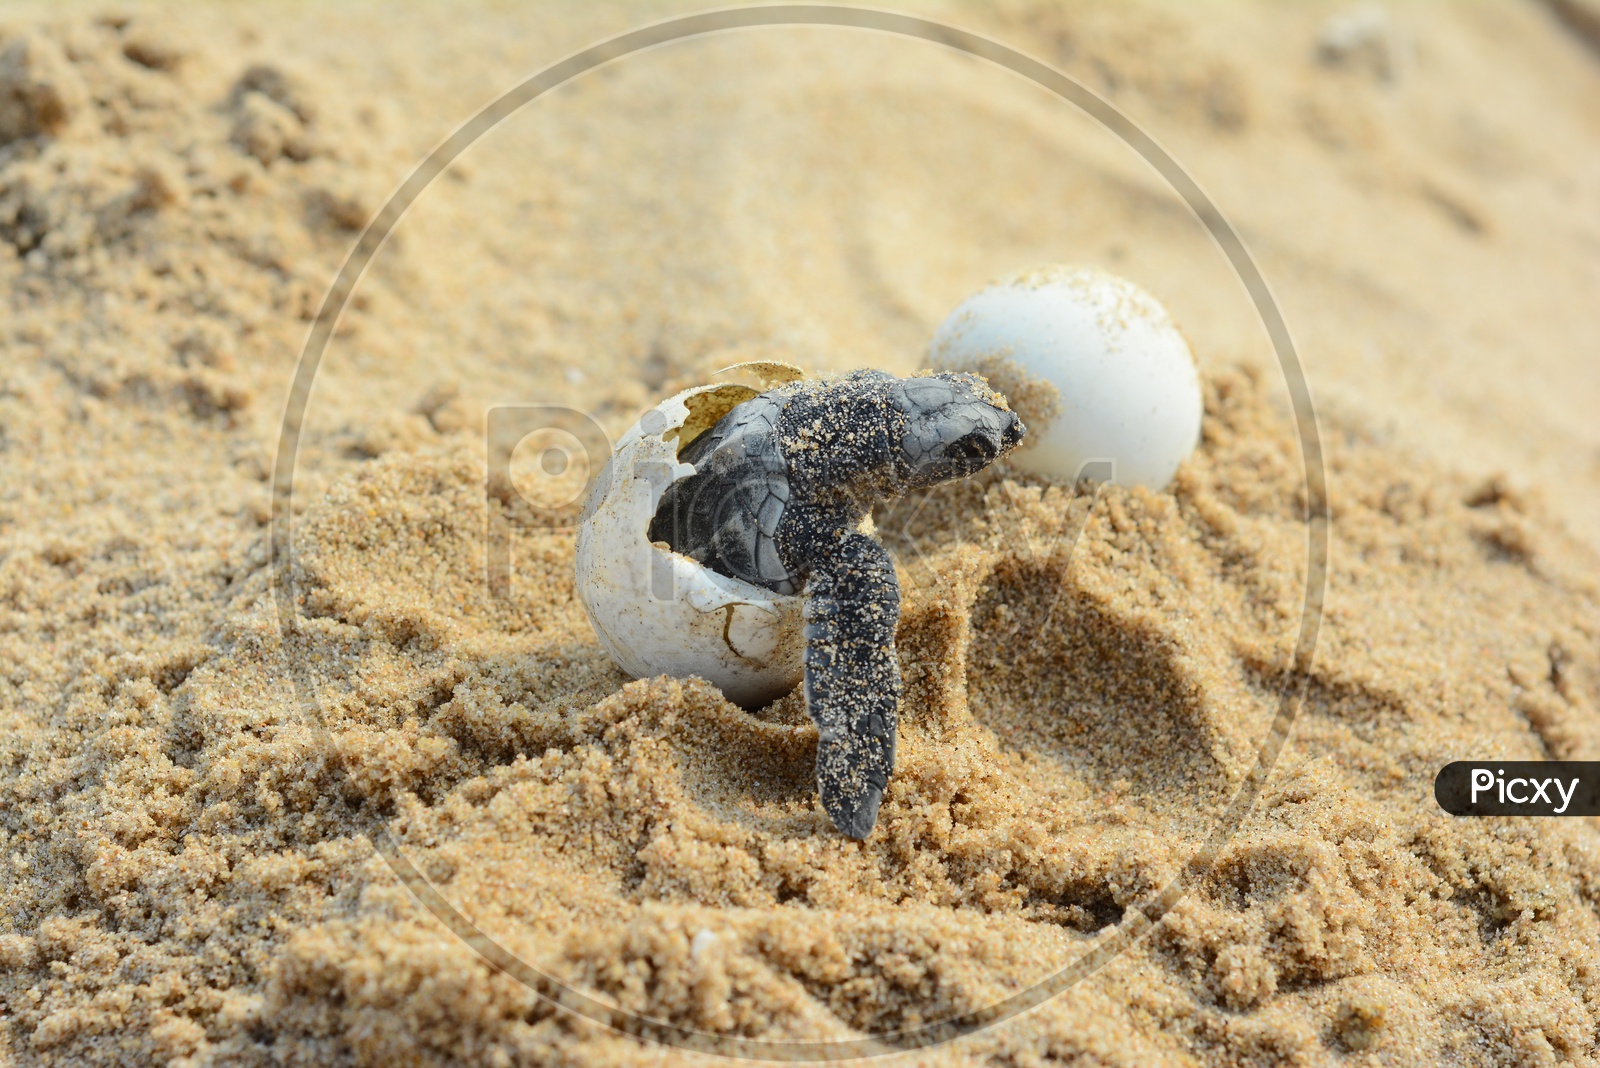 Baby Olive Ridley Turtle Coming out of Egg